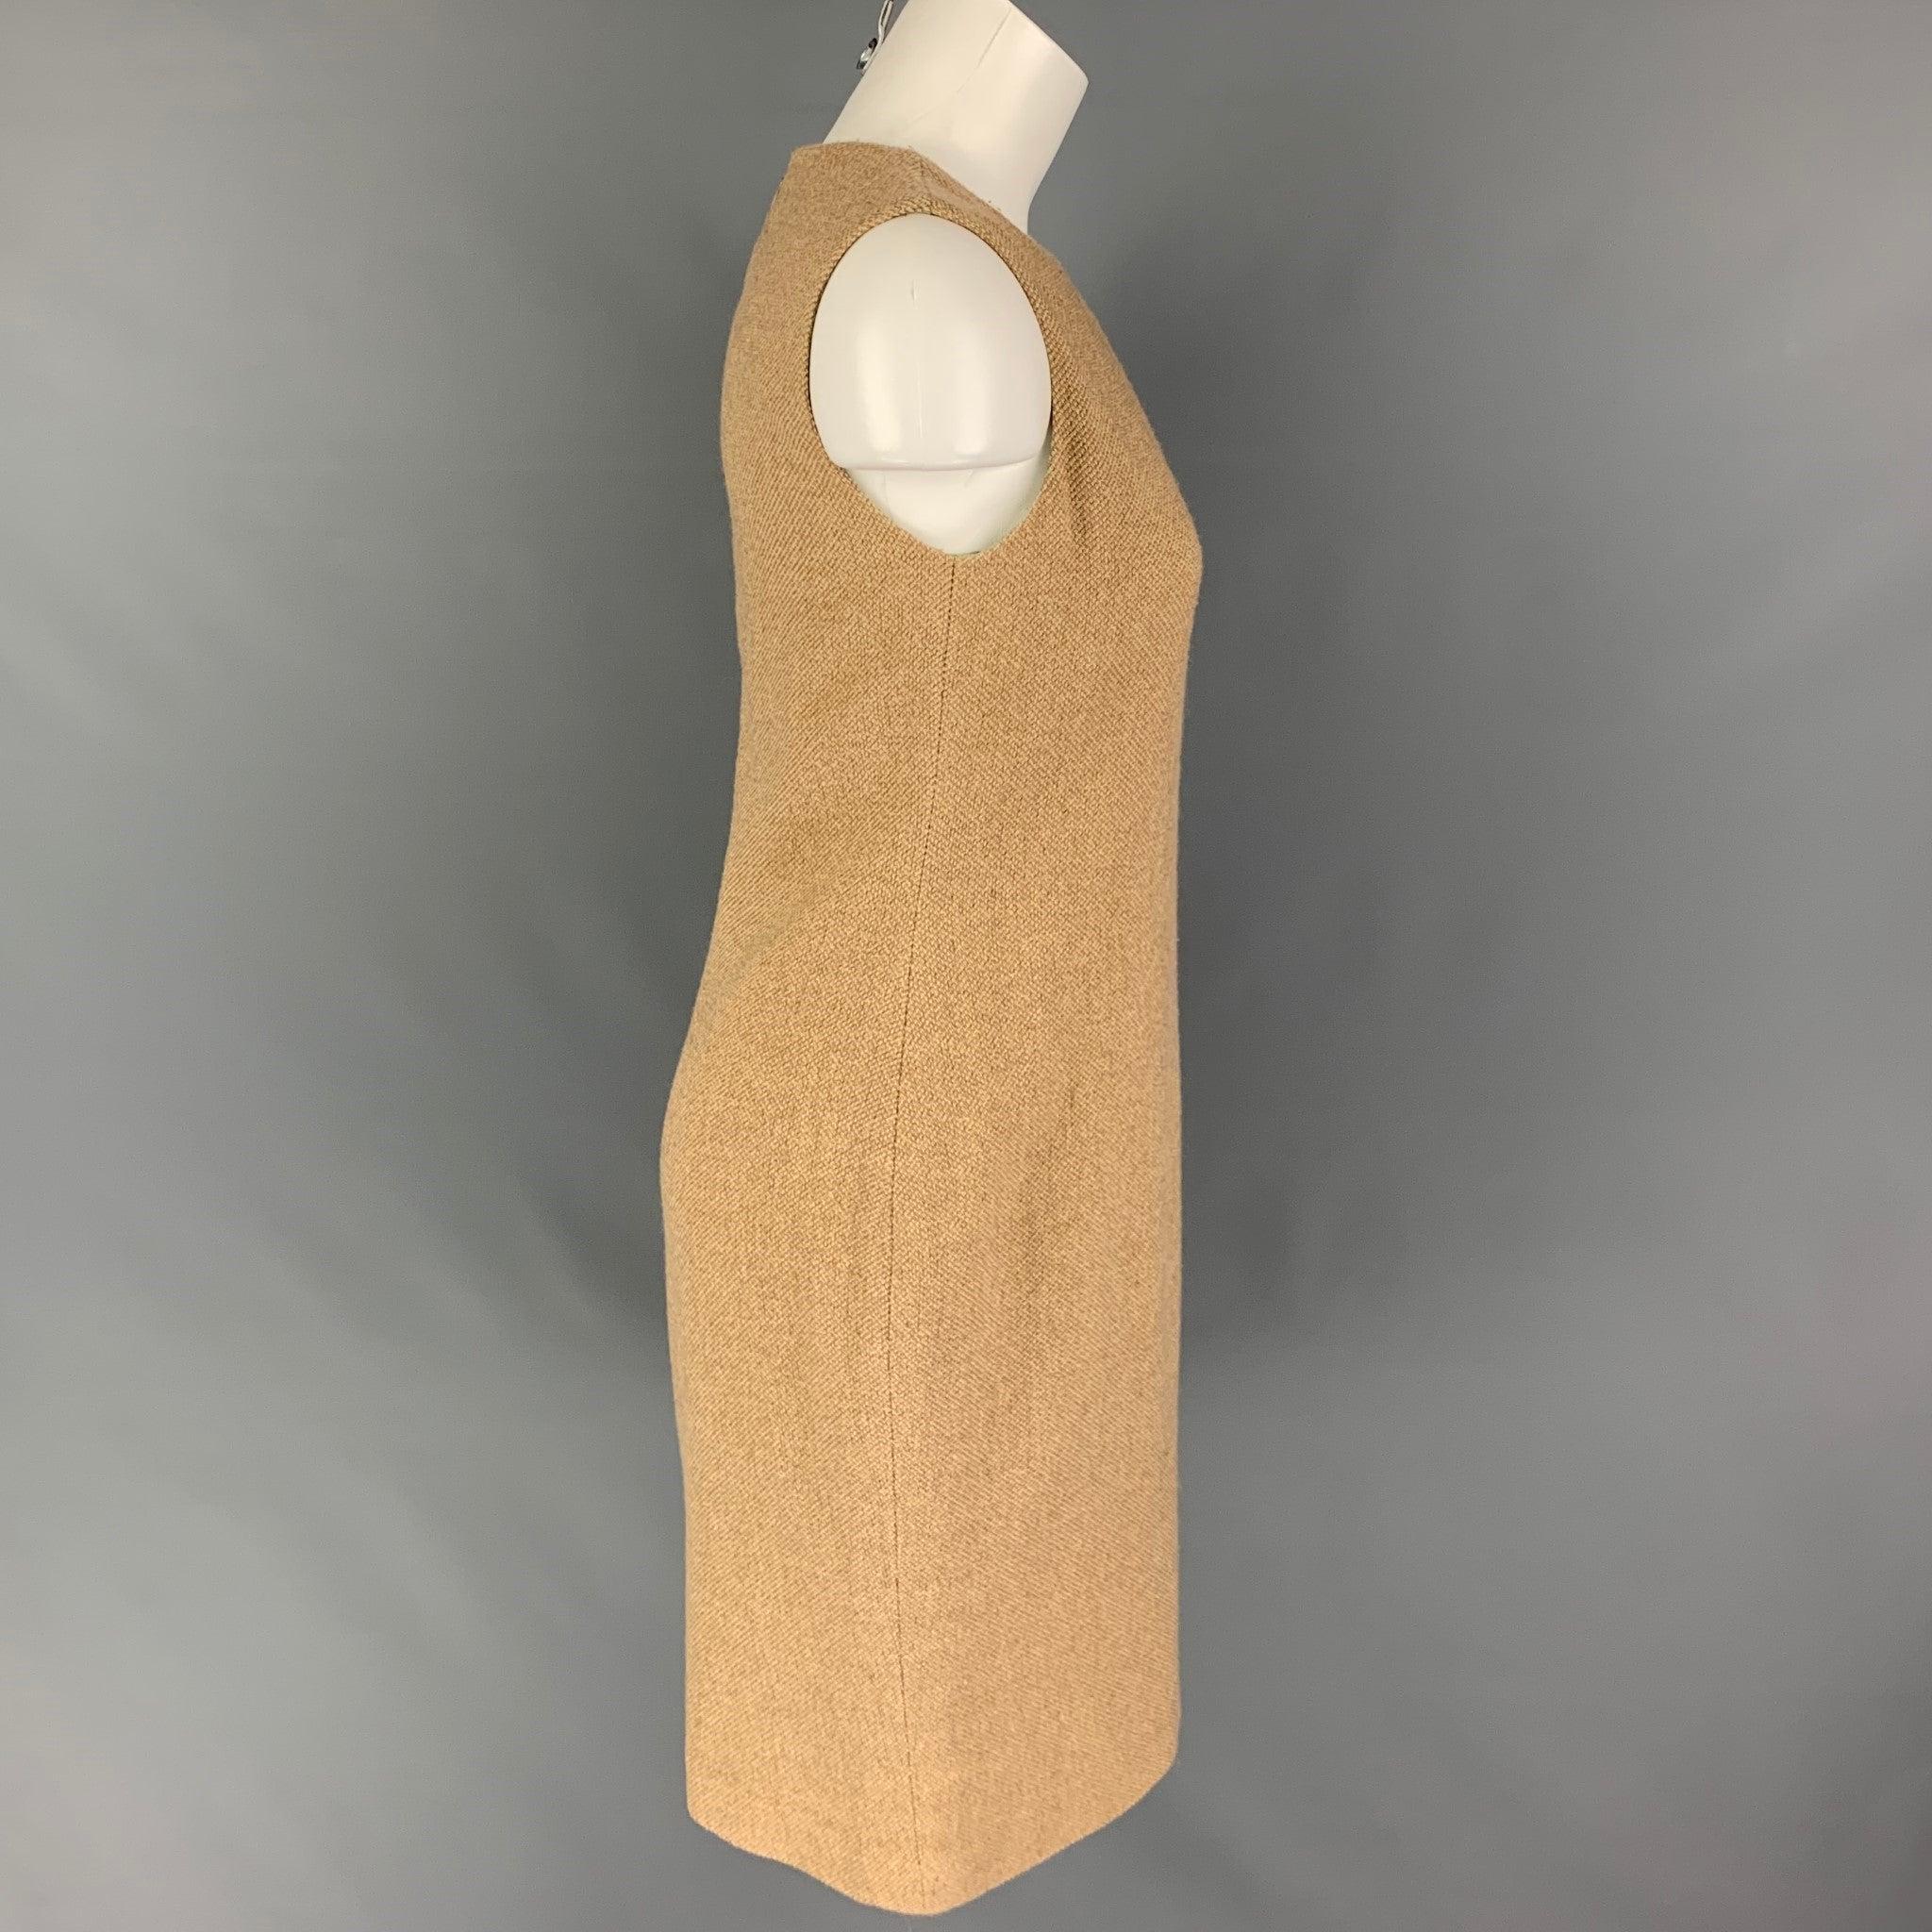 RALPH LAUREN 'Black Label' dress comes in a beige wool blend featuring an a-line style, sleeveless, and a back zipper closure. Made in USA.
Very Good
Pre-Owned Condition. 

Marked:  6 

Measurements: 
 
Shoulder: 13 inches Bust: 32 inches Waist: 32